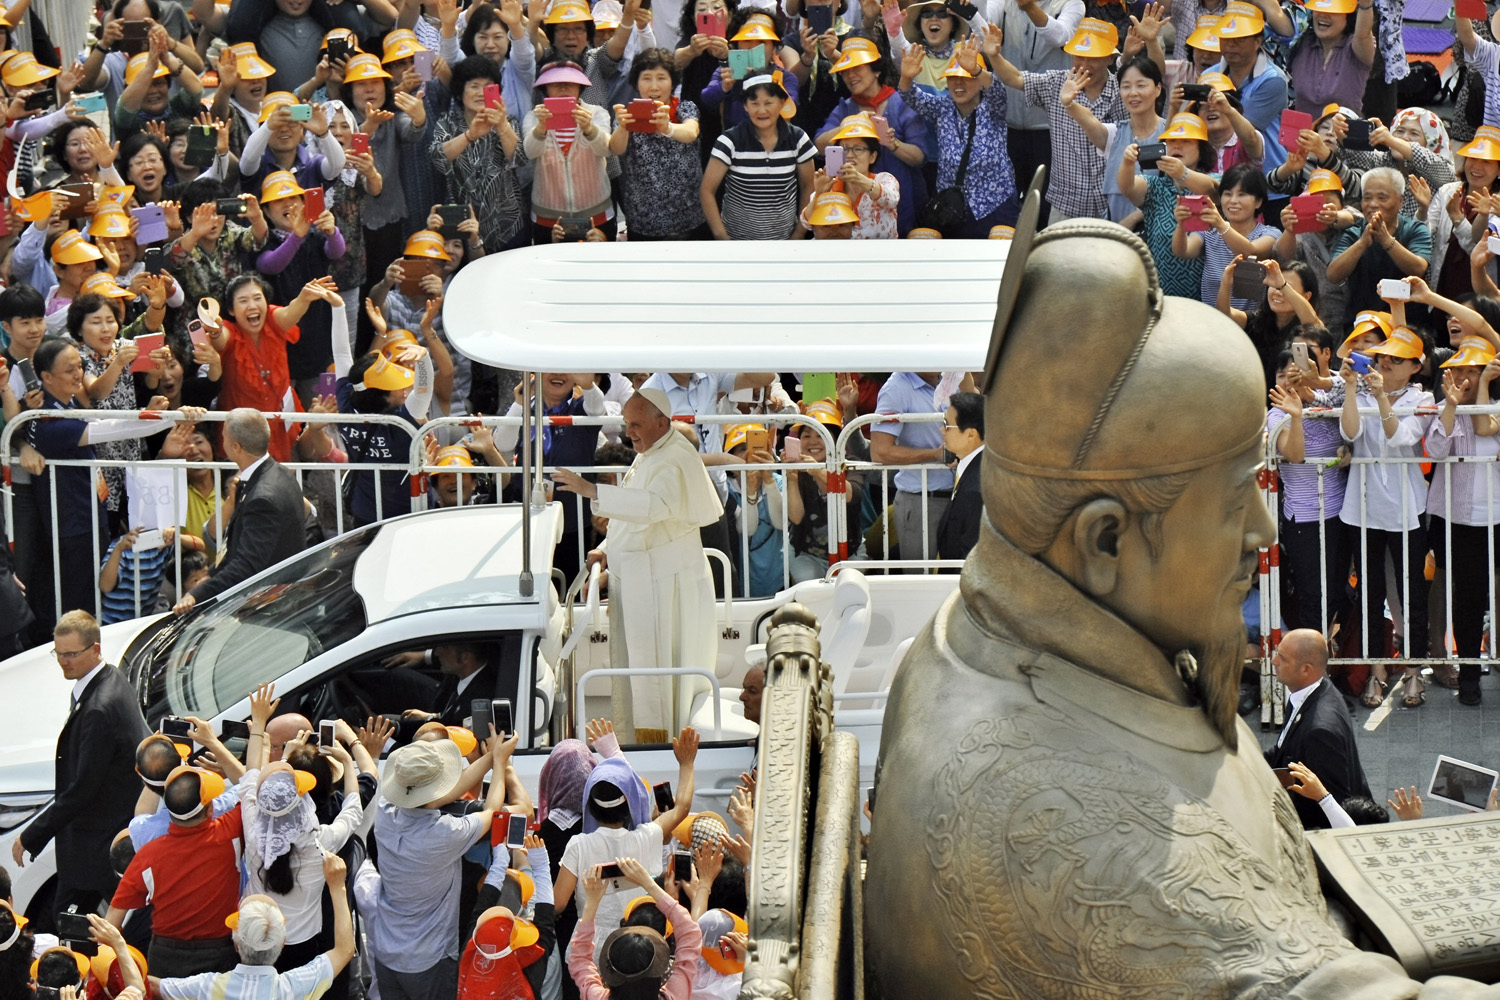 POPE FRANCIS BEATIFICATION OF 124 KOREAN MARTYRS IN SOUTH KOREA